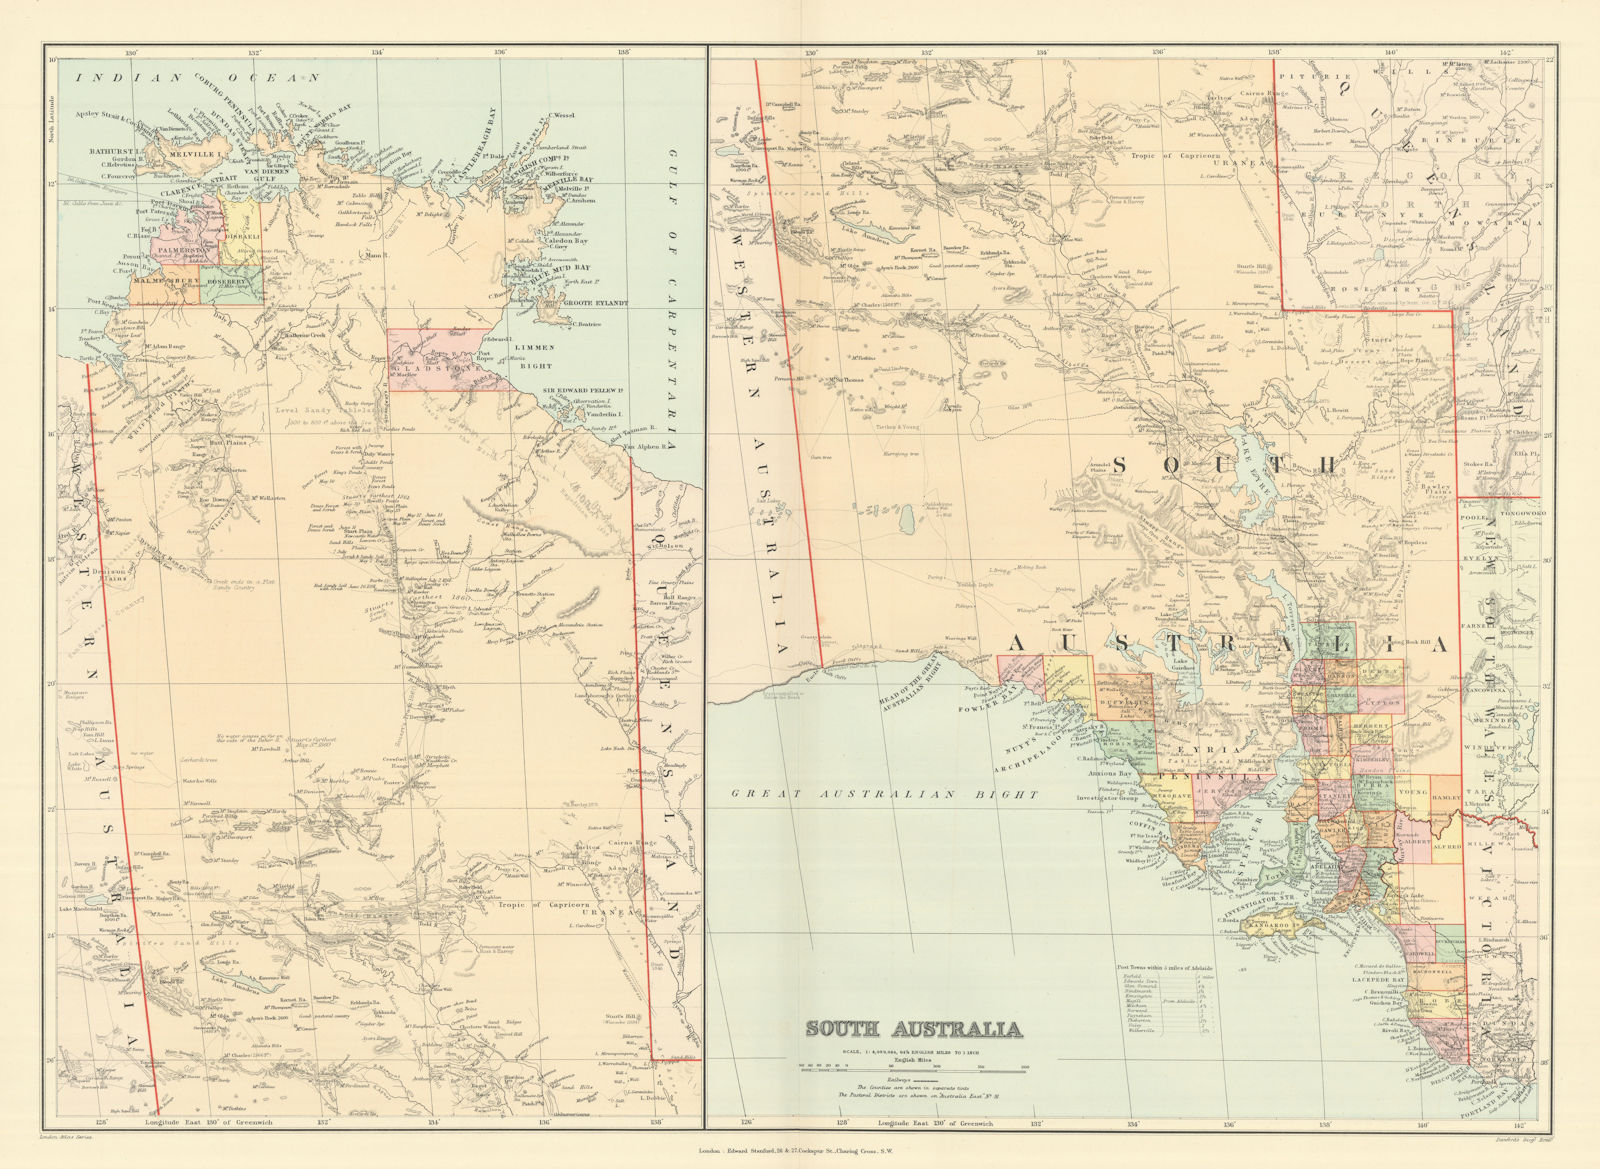 South Australia & Northern Territory. Explorers' routes. Large STANFORD 1894 map